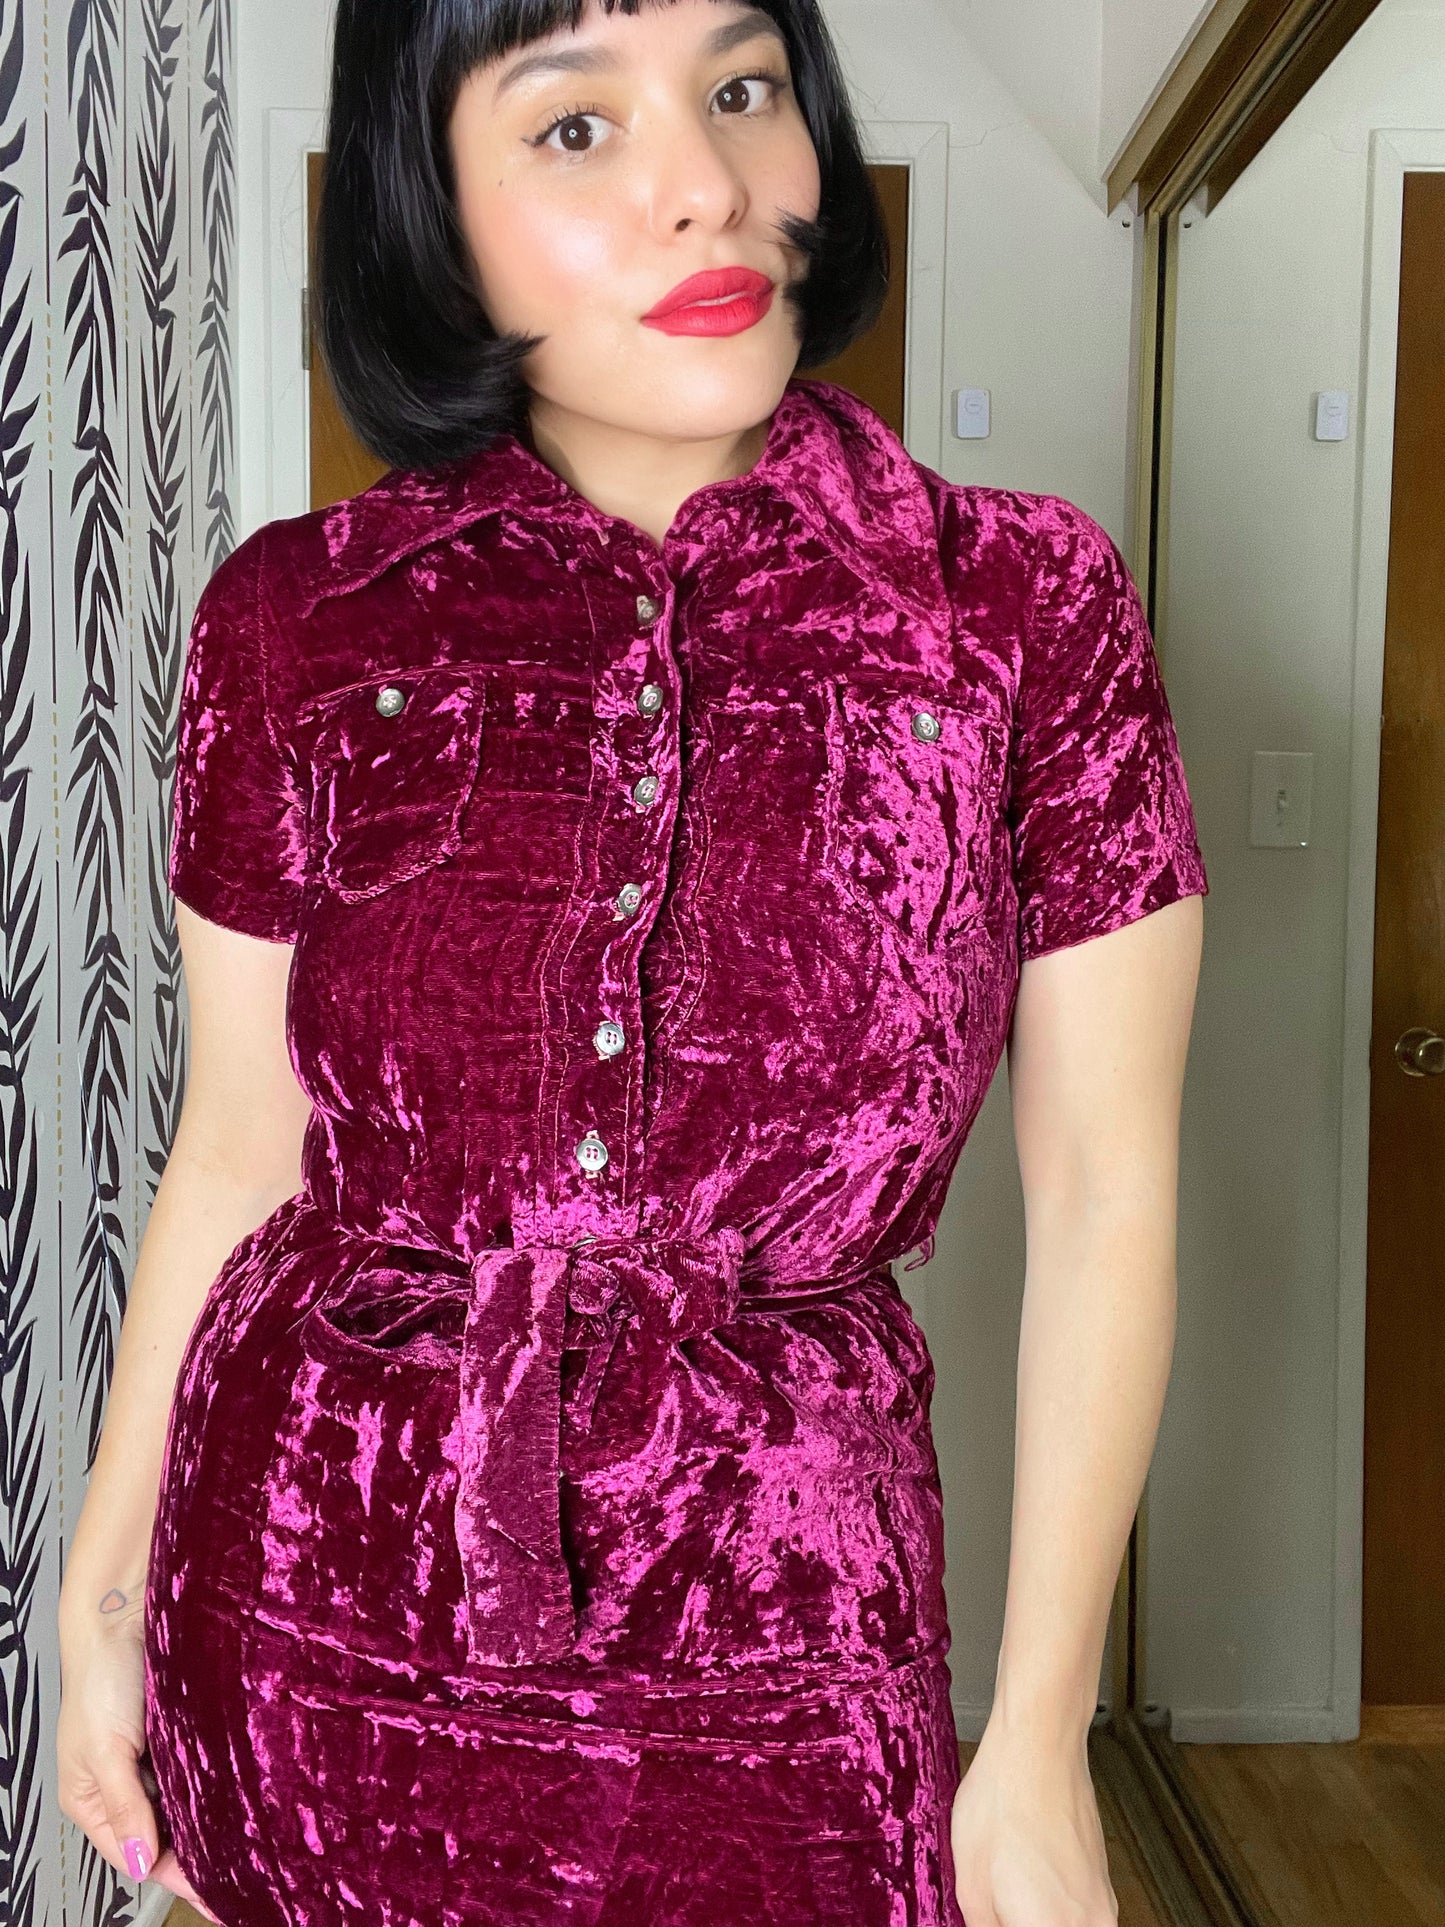 Vintage 60s Mod Crushed Velvet Wine Red Cranberry Mini Dress With Dagger Collar Best Fits Sizes XS-S